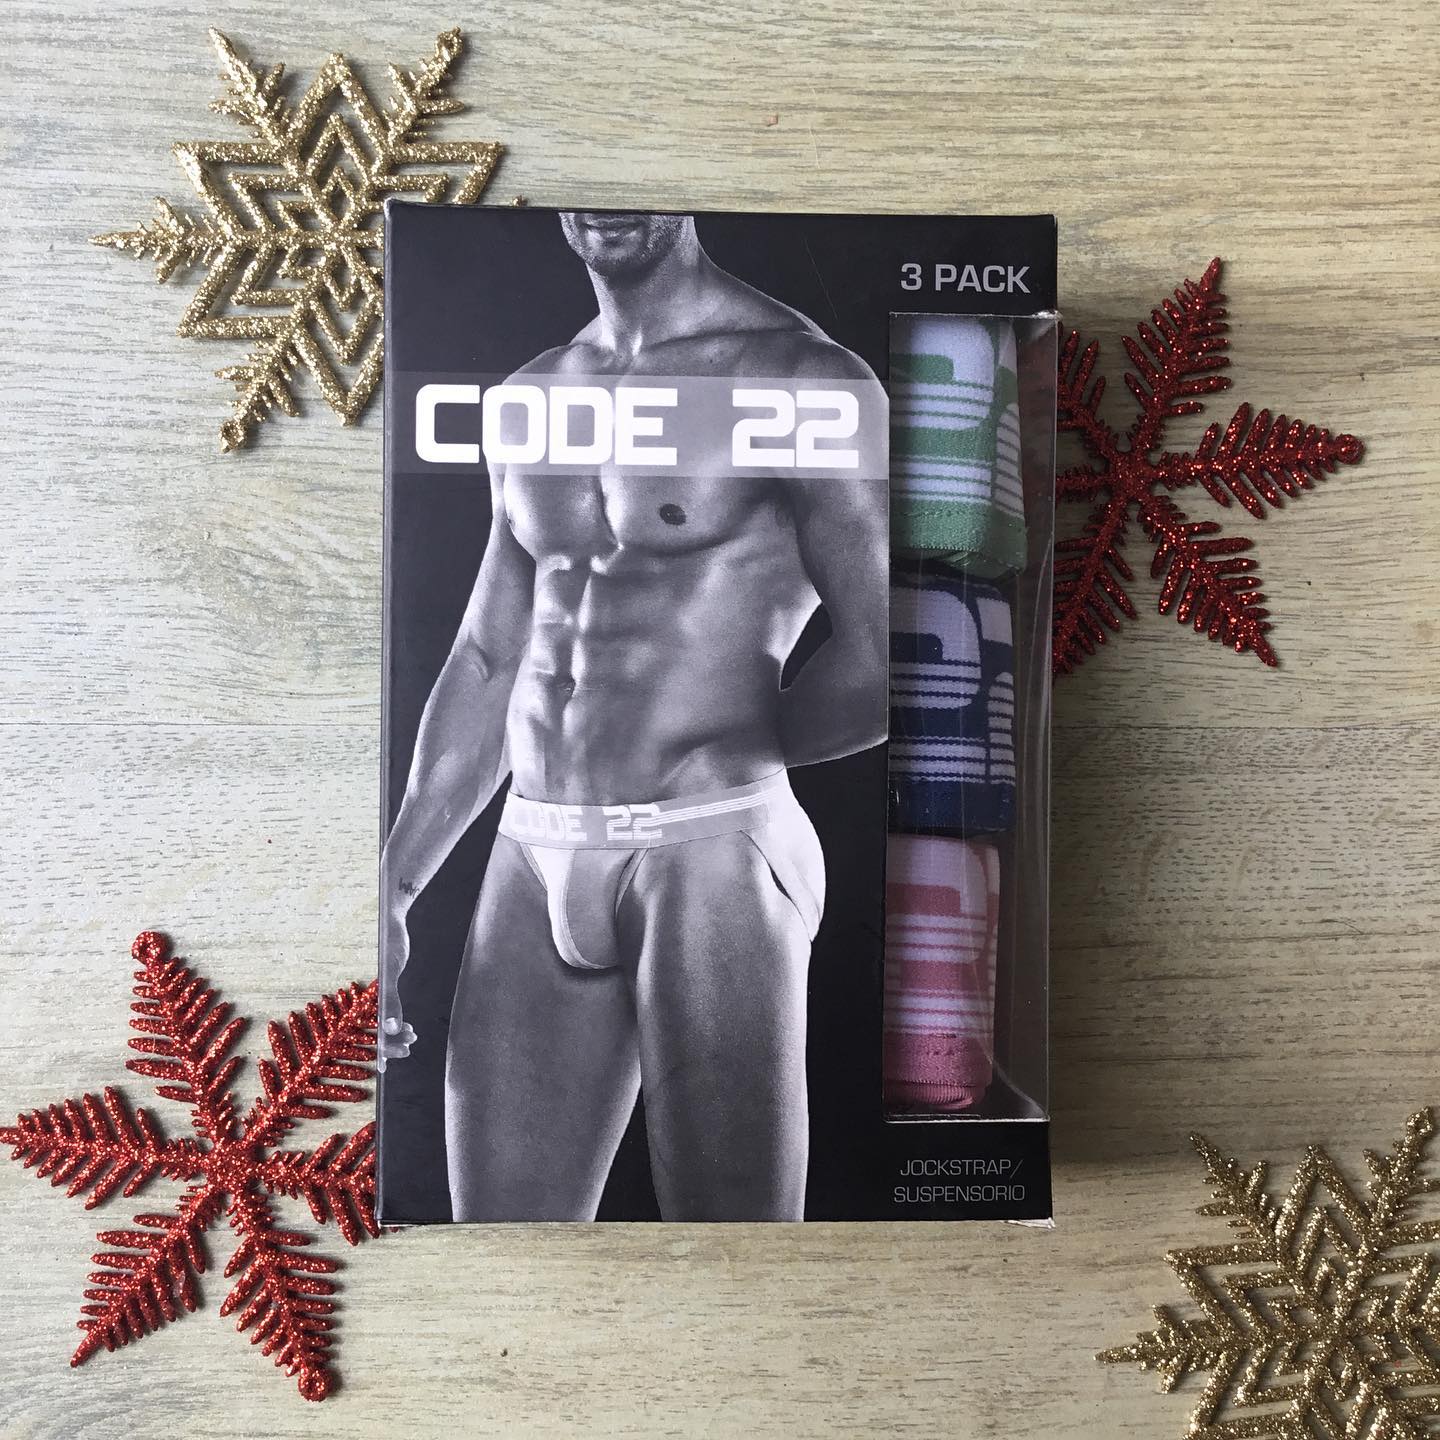 Our underwear suggestion today is the Fun 3-pack of pink, green and blue fashion jockstraps by CODE 22. Would you wear it?
____
menandunderwear.com/shop